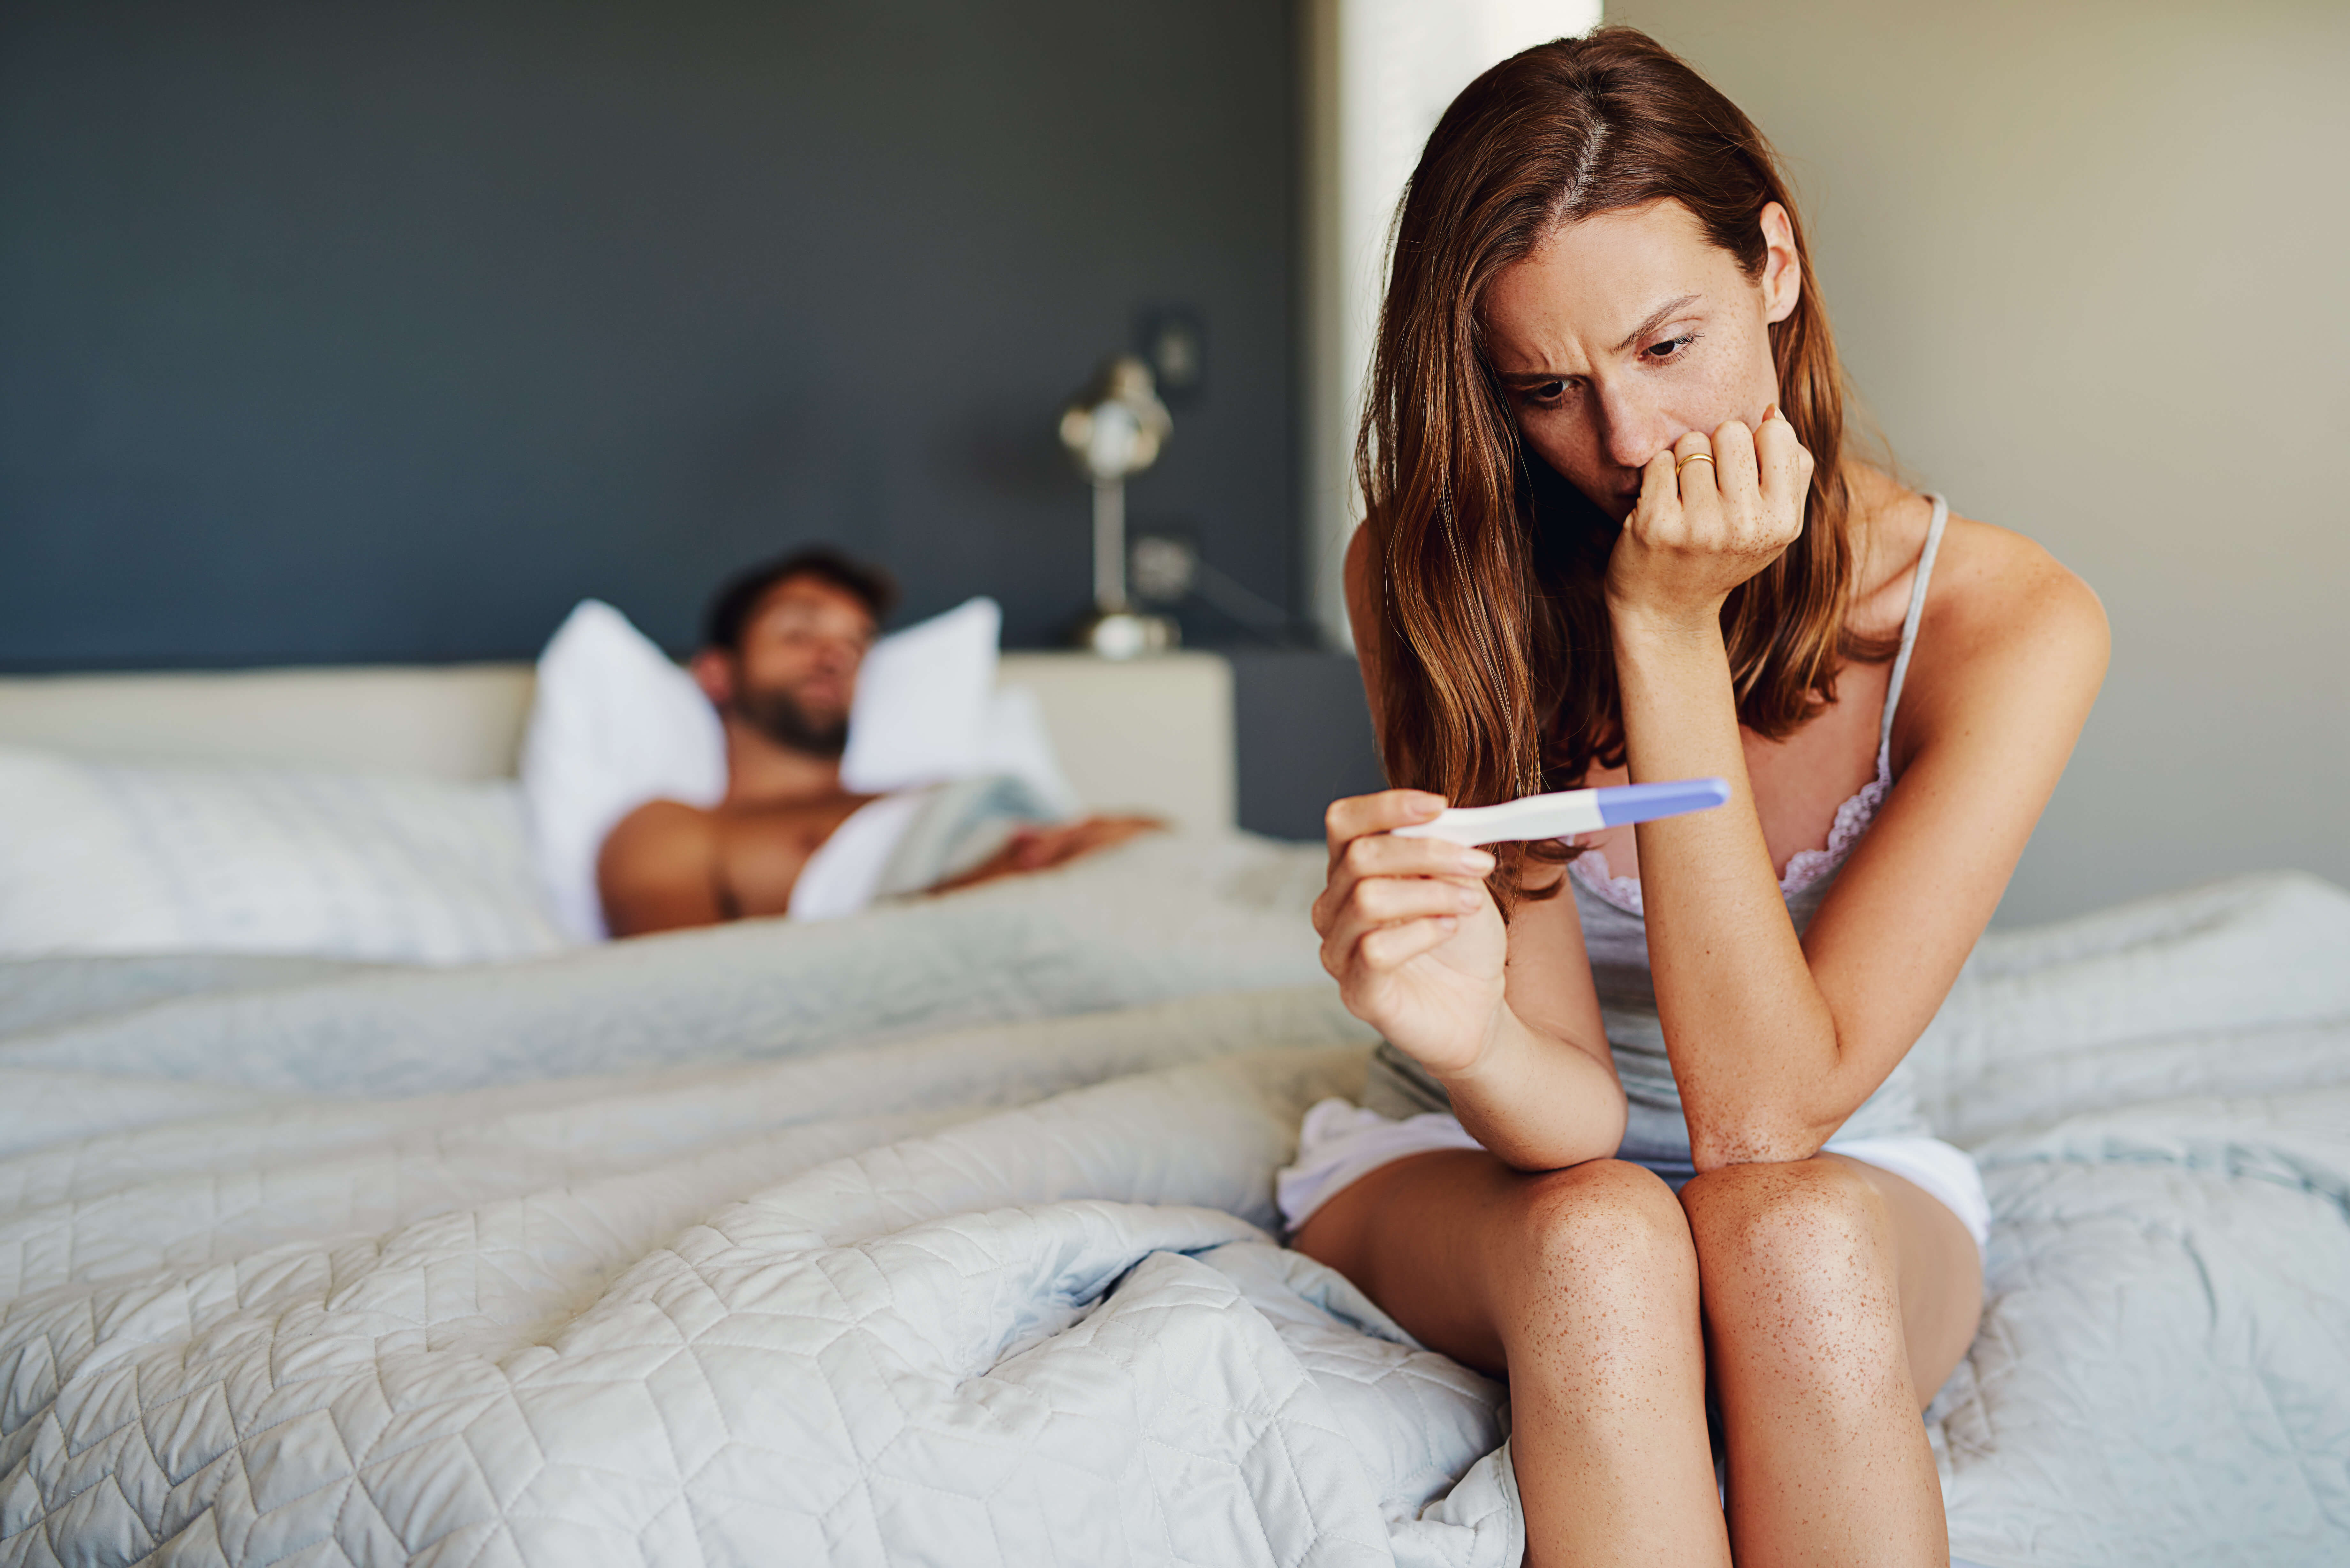 Fathers and Unplanned Pregnancy